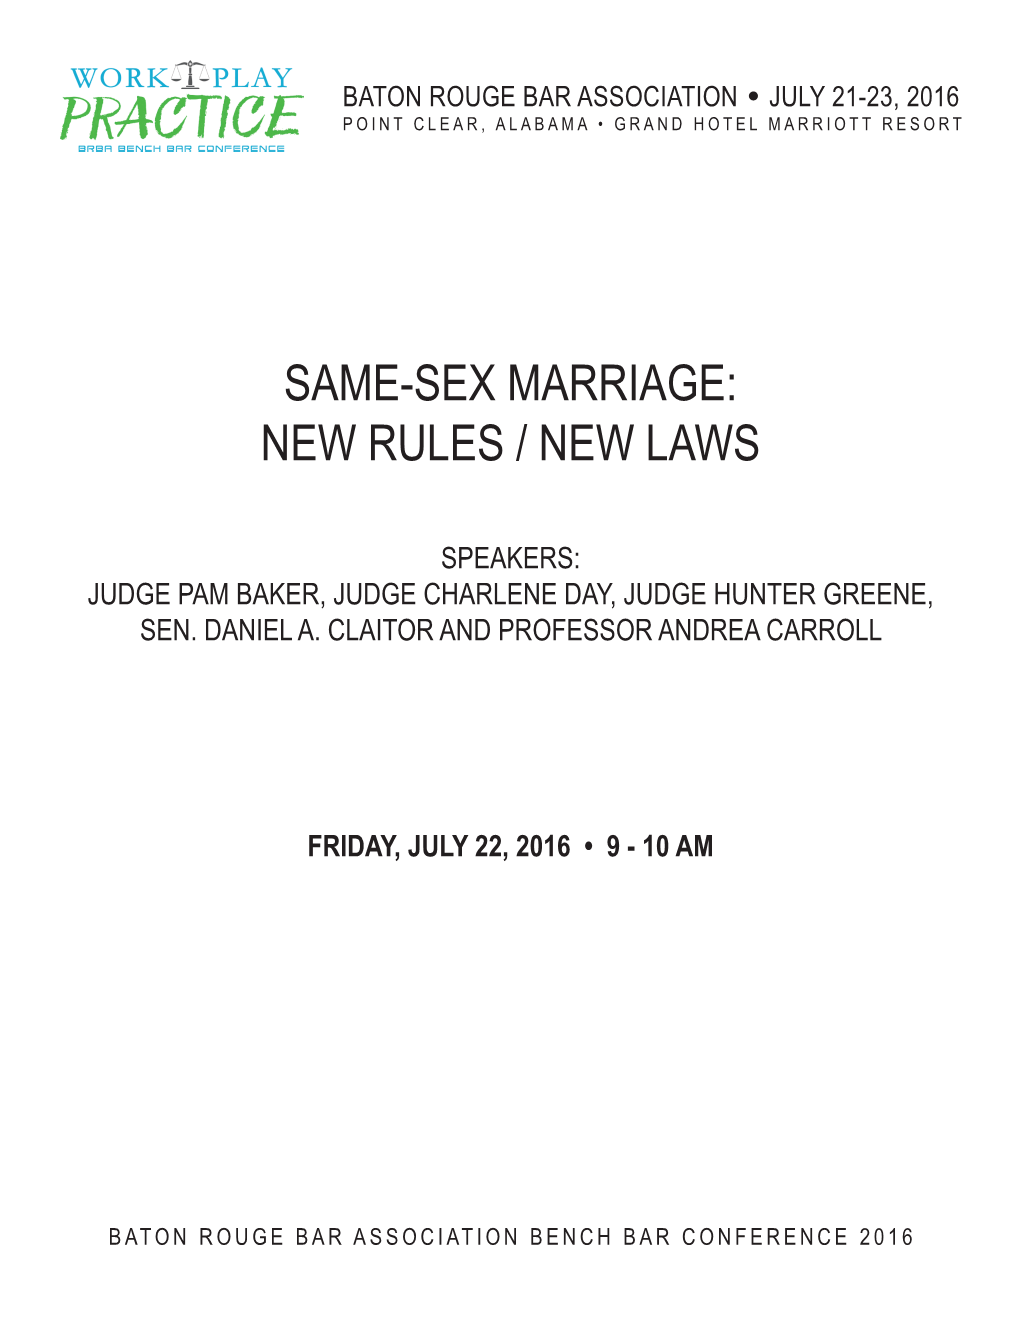 Same-Sex Marriage: New Rules / New Laws